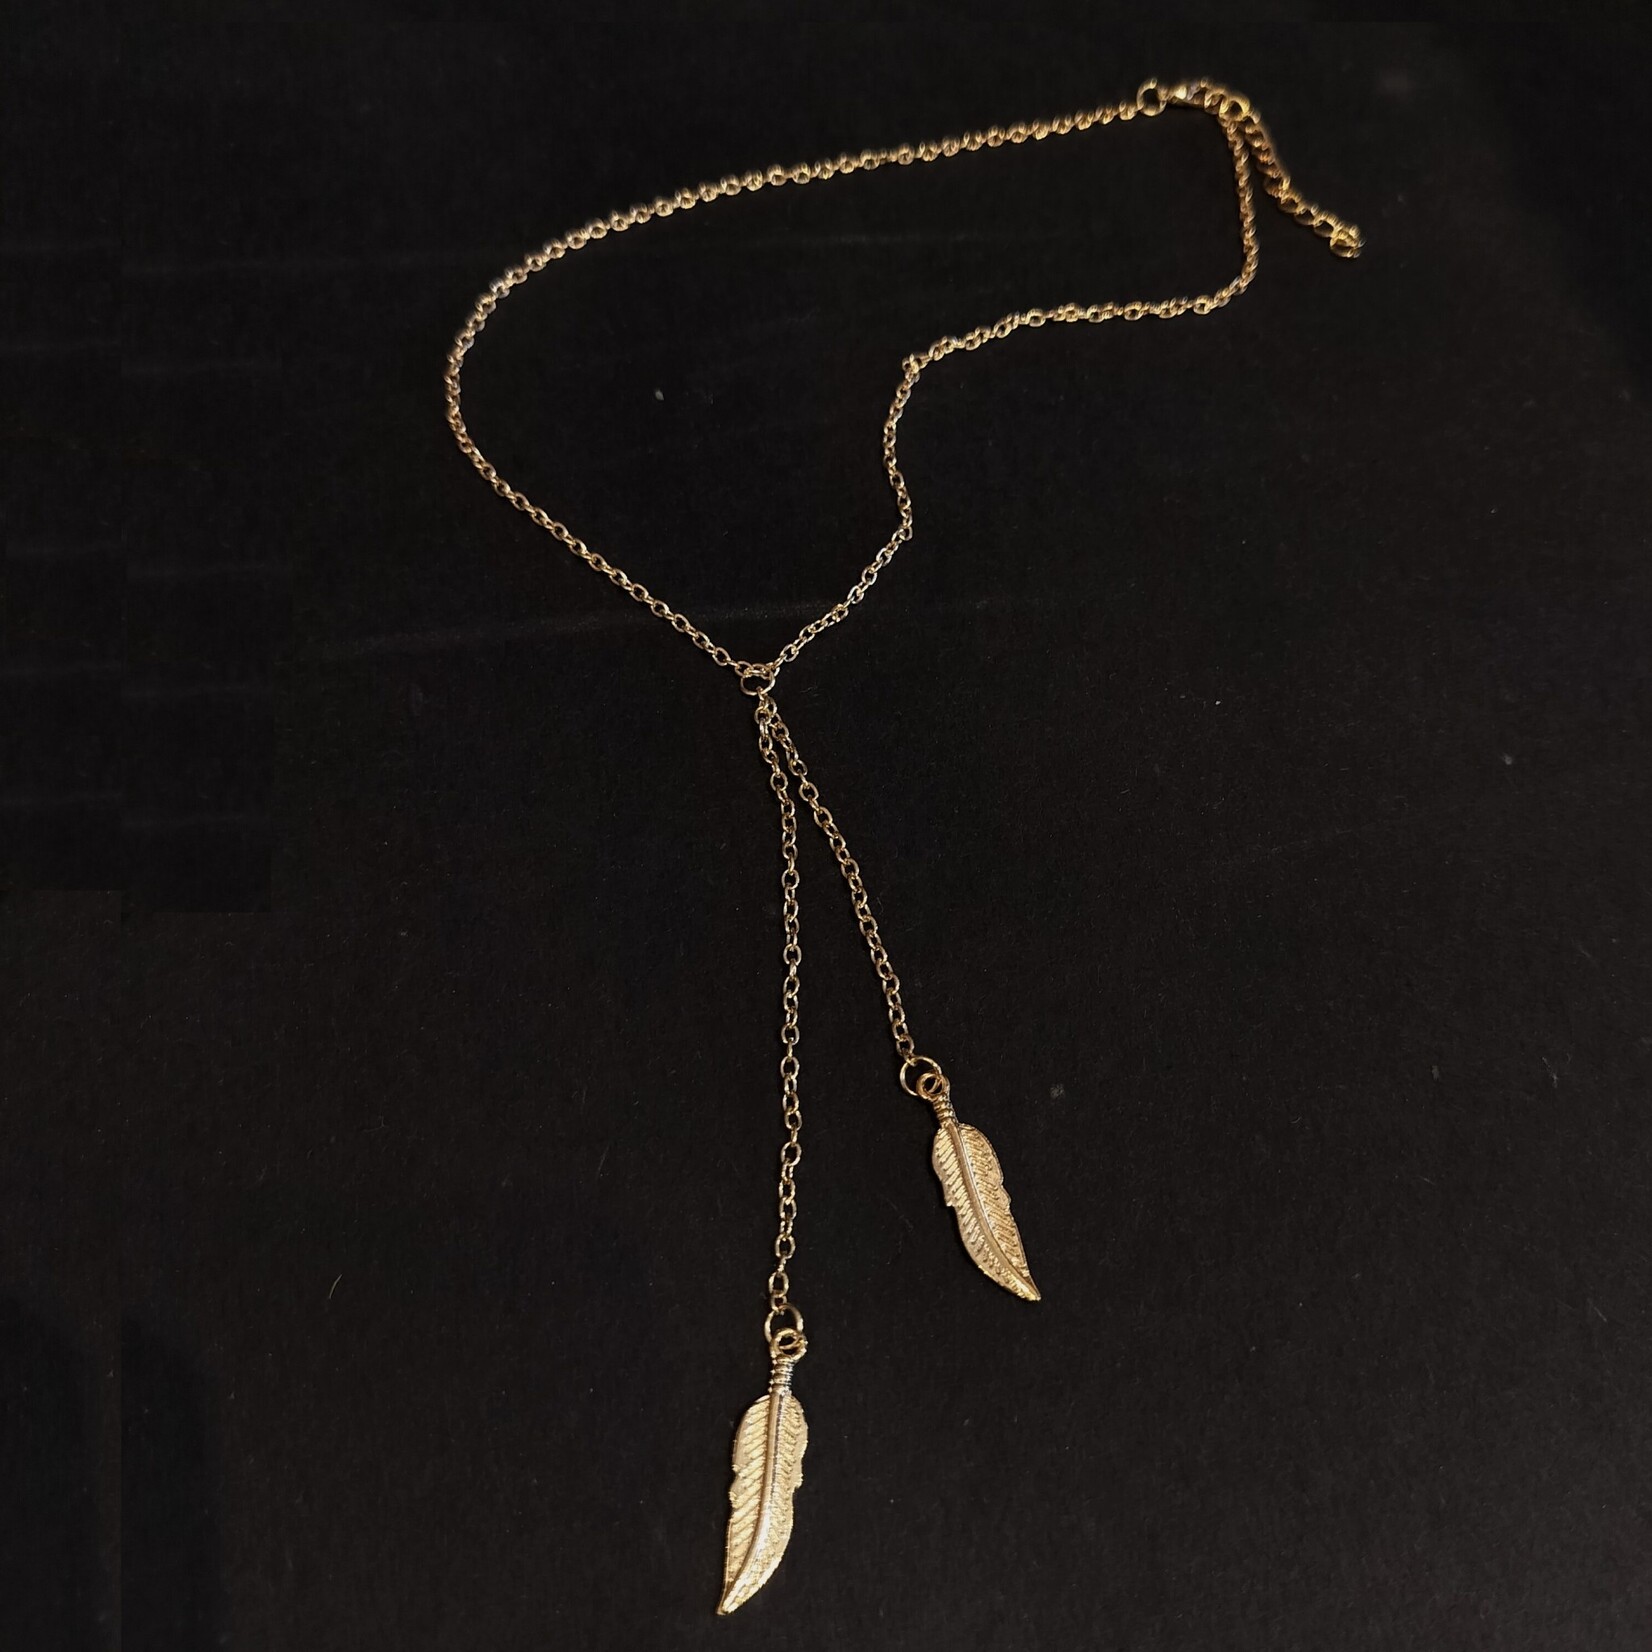 Gold Chain Necklace - 2 Feathers - Ready to Wear